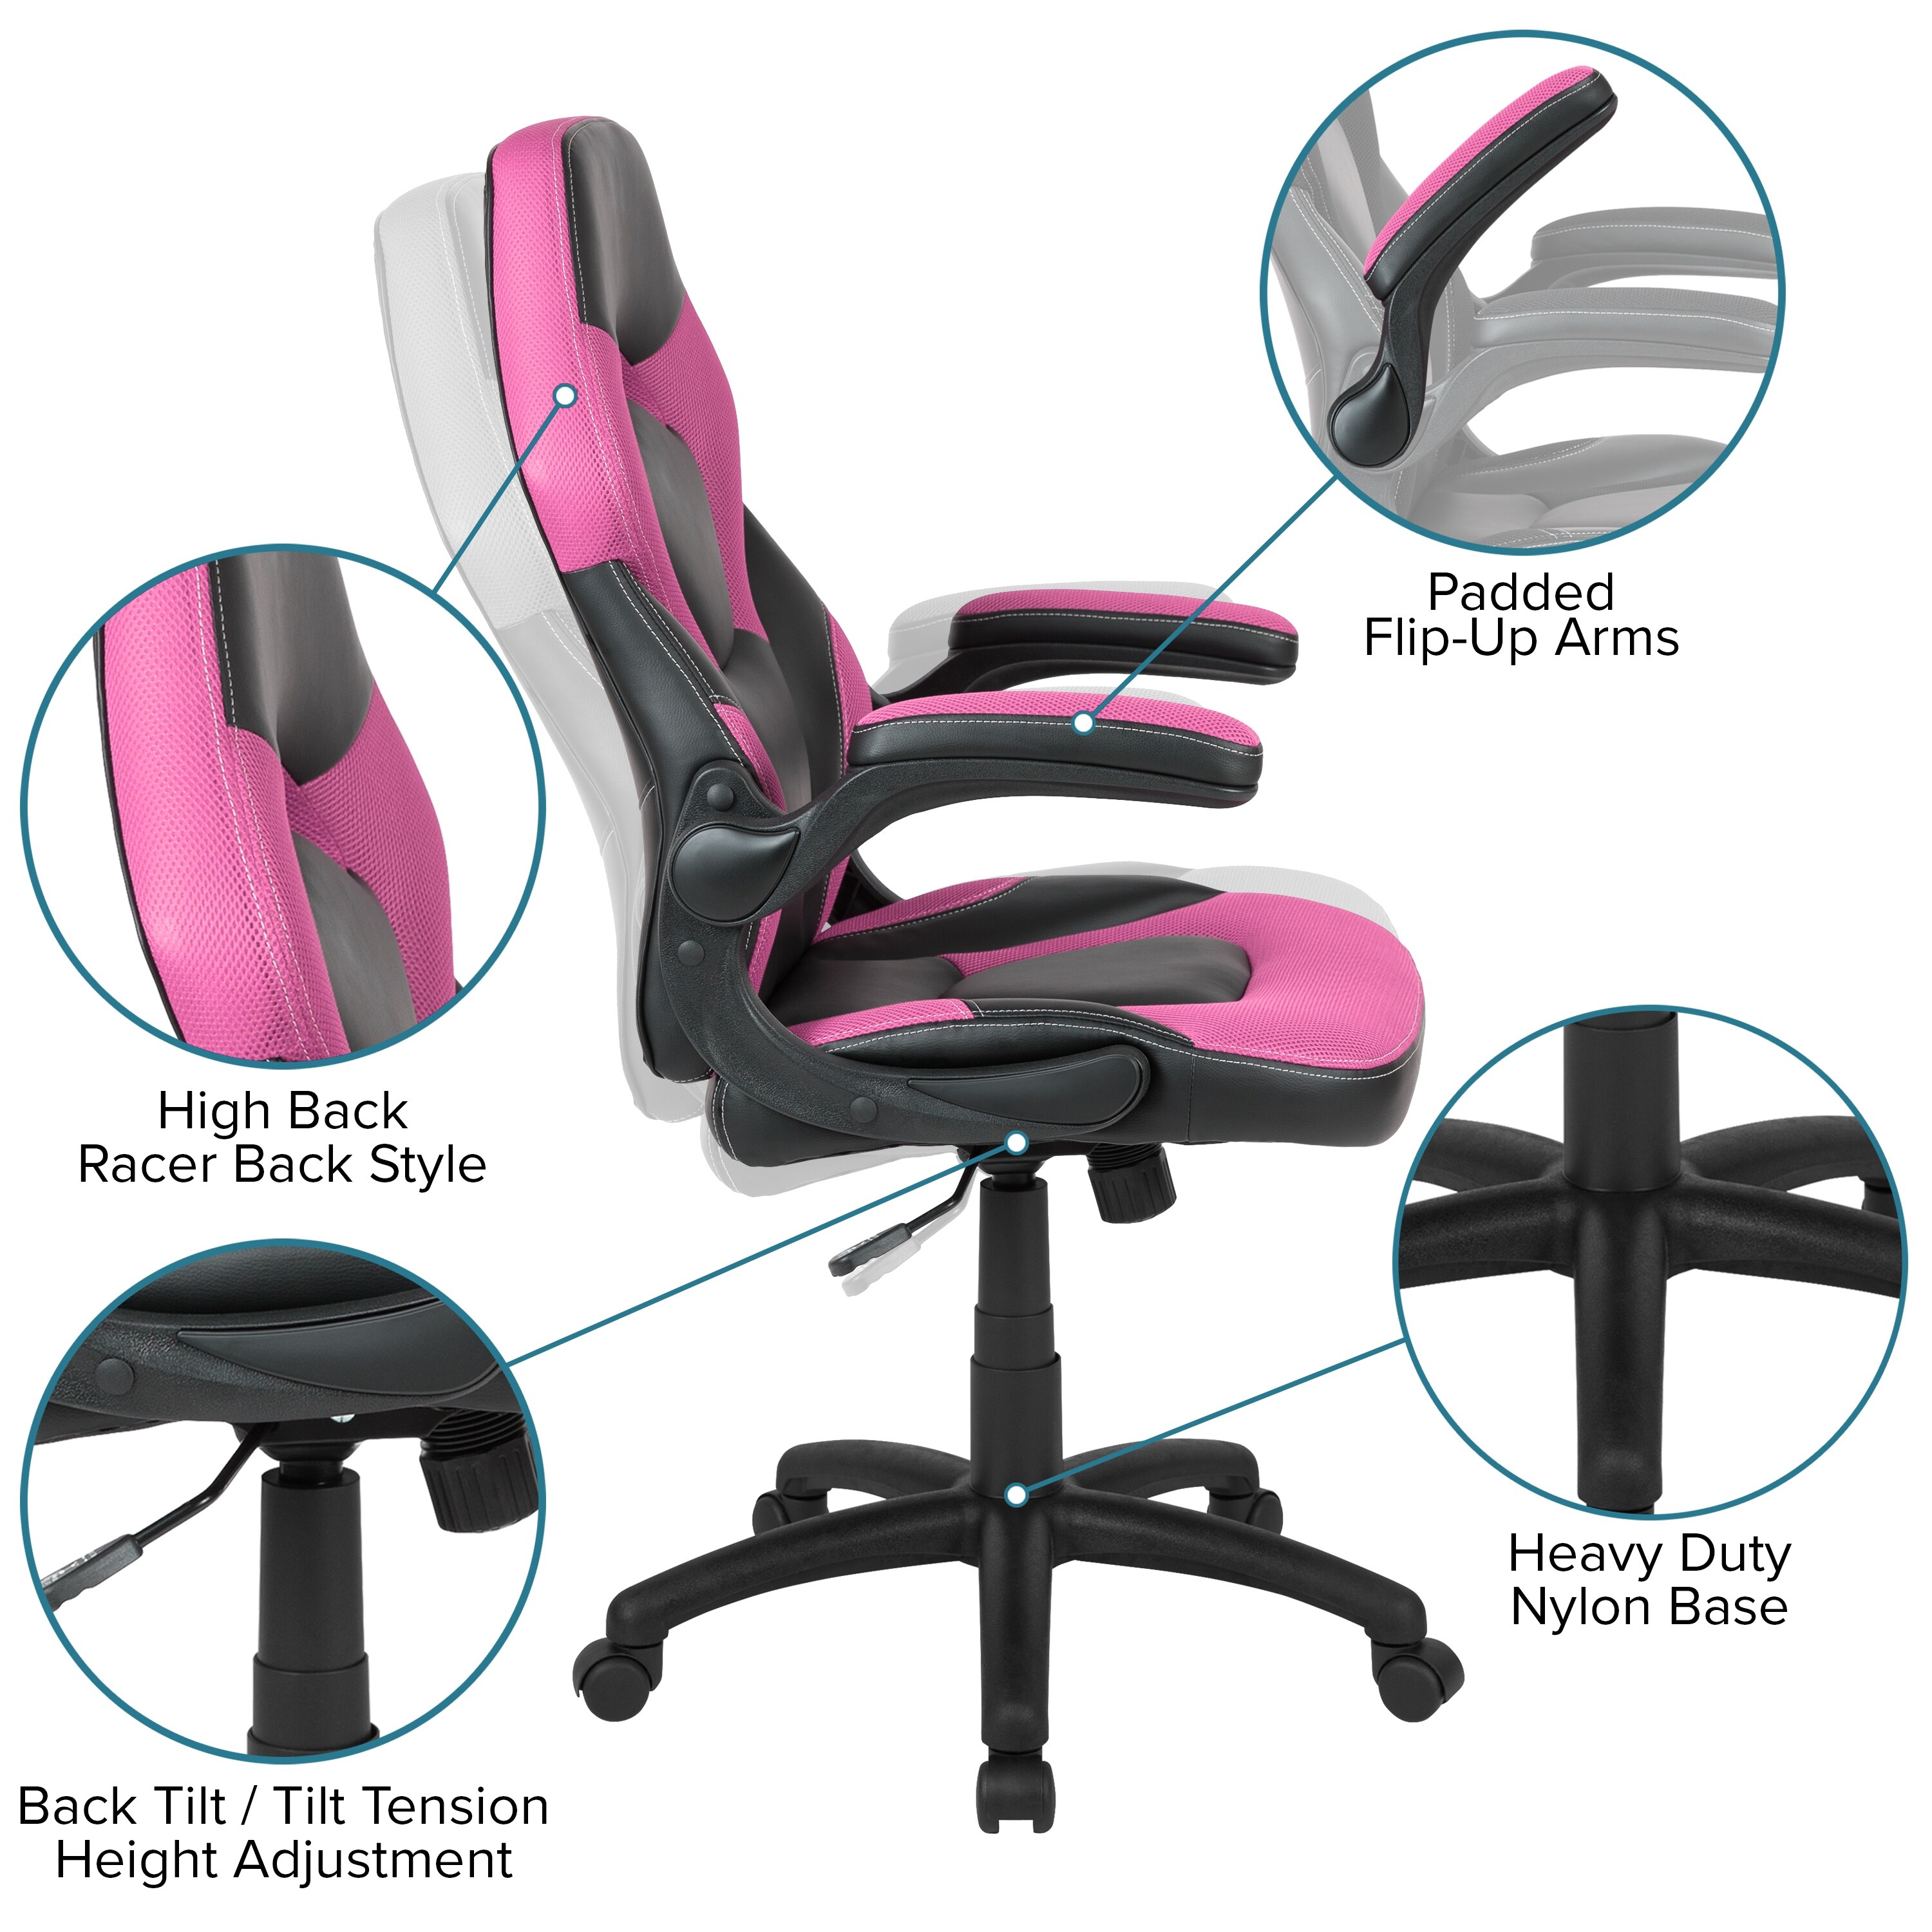 https://ak1.ostkcdn.com/images/products/is/images/direct/6394edee948ae10ba063a4abdbe02535f21eced7/Gaming-Desk-%26-Chair-Set-with-Cup-Holder%2C-Headphone-Hook%2C-and-Monitor-Stand.jpg